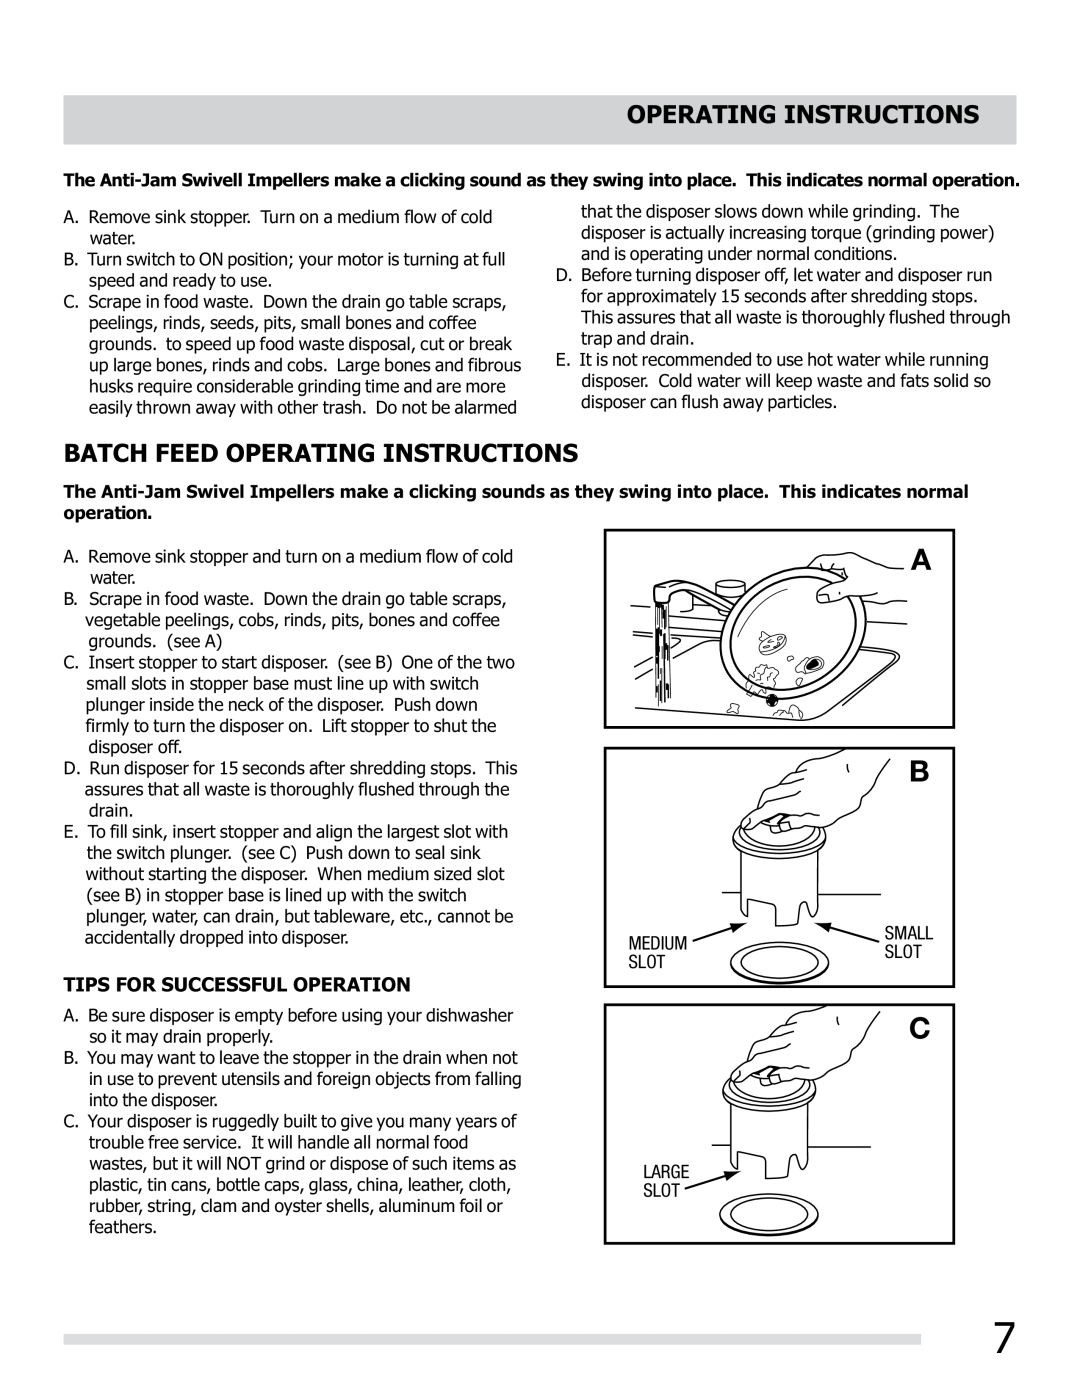 Frigidaire 560C525P02 manual Batch Feed Operating Instructions, Tips For Successful Operation, Medium, Large Slot 